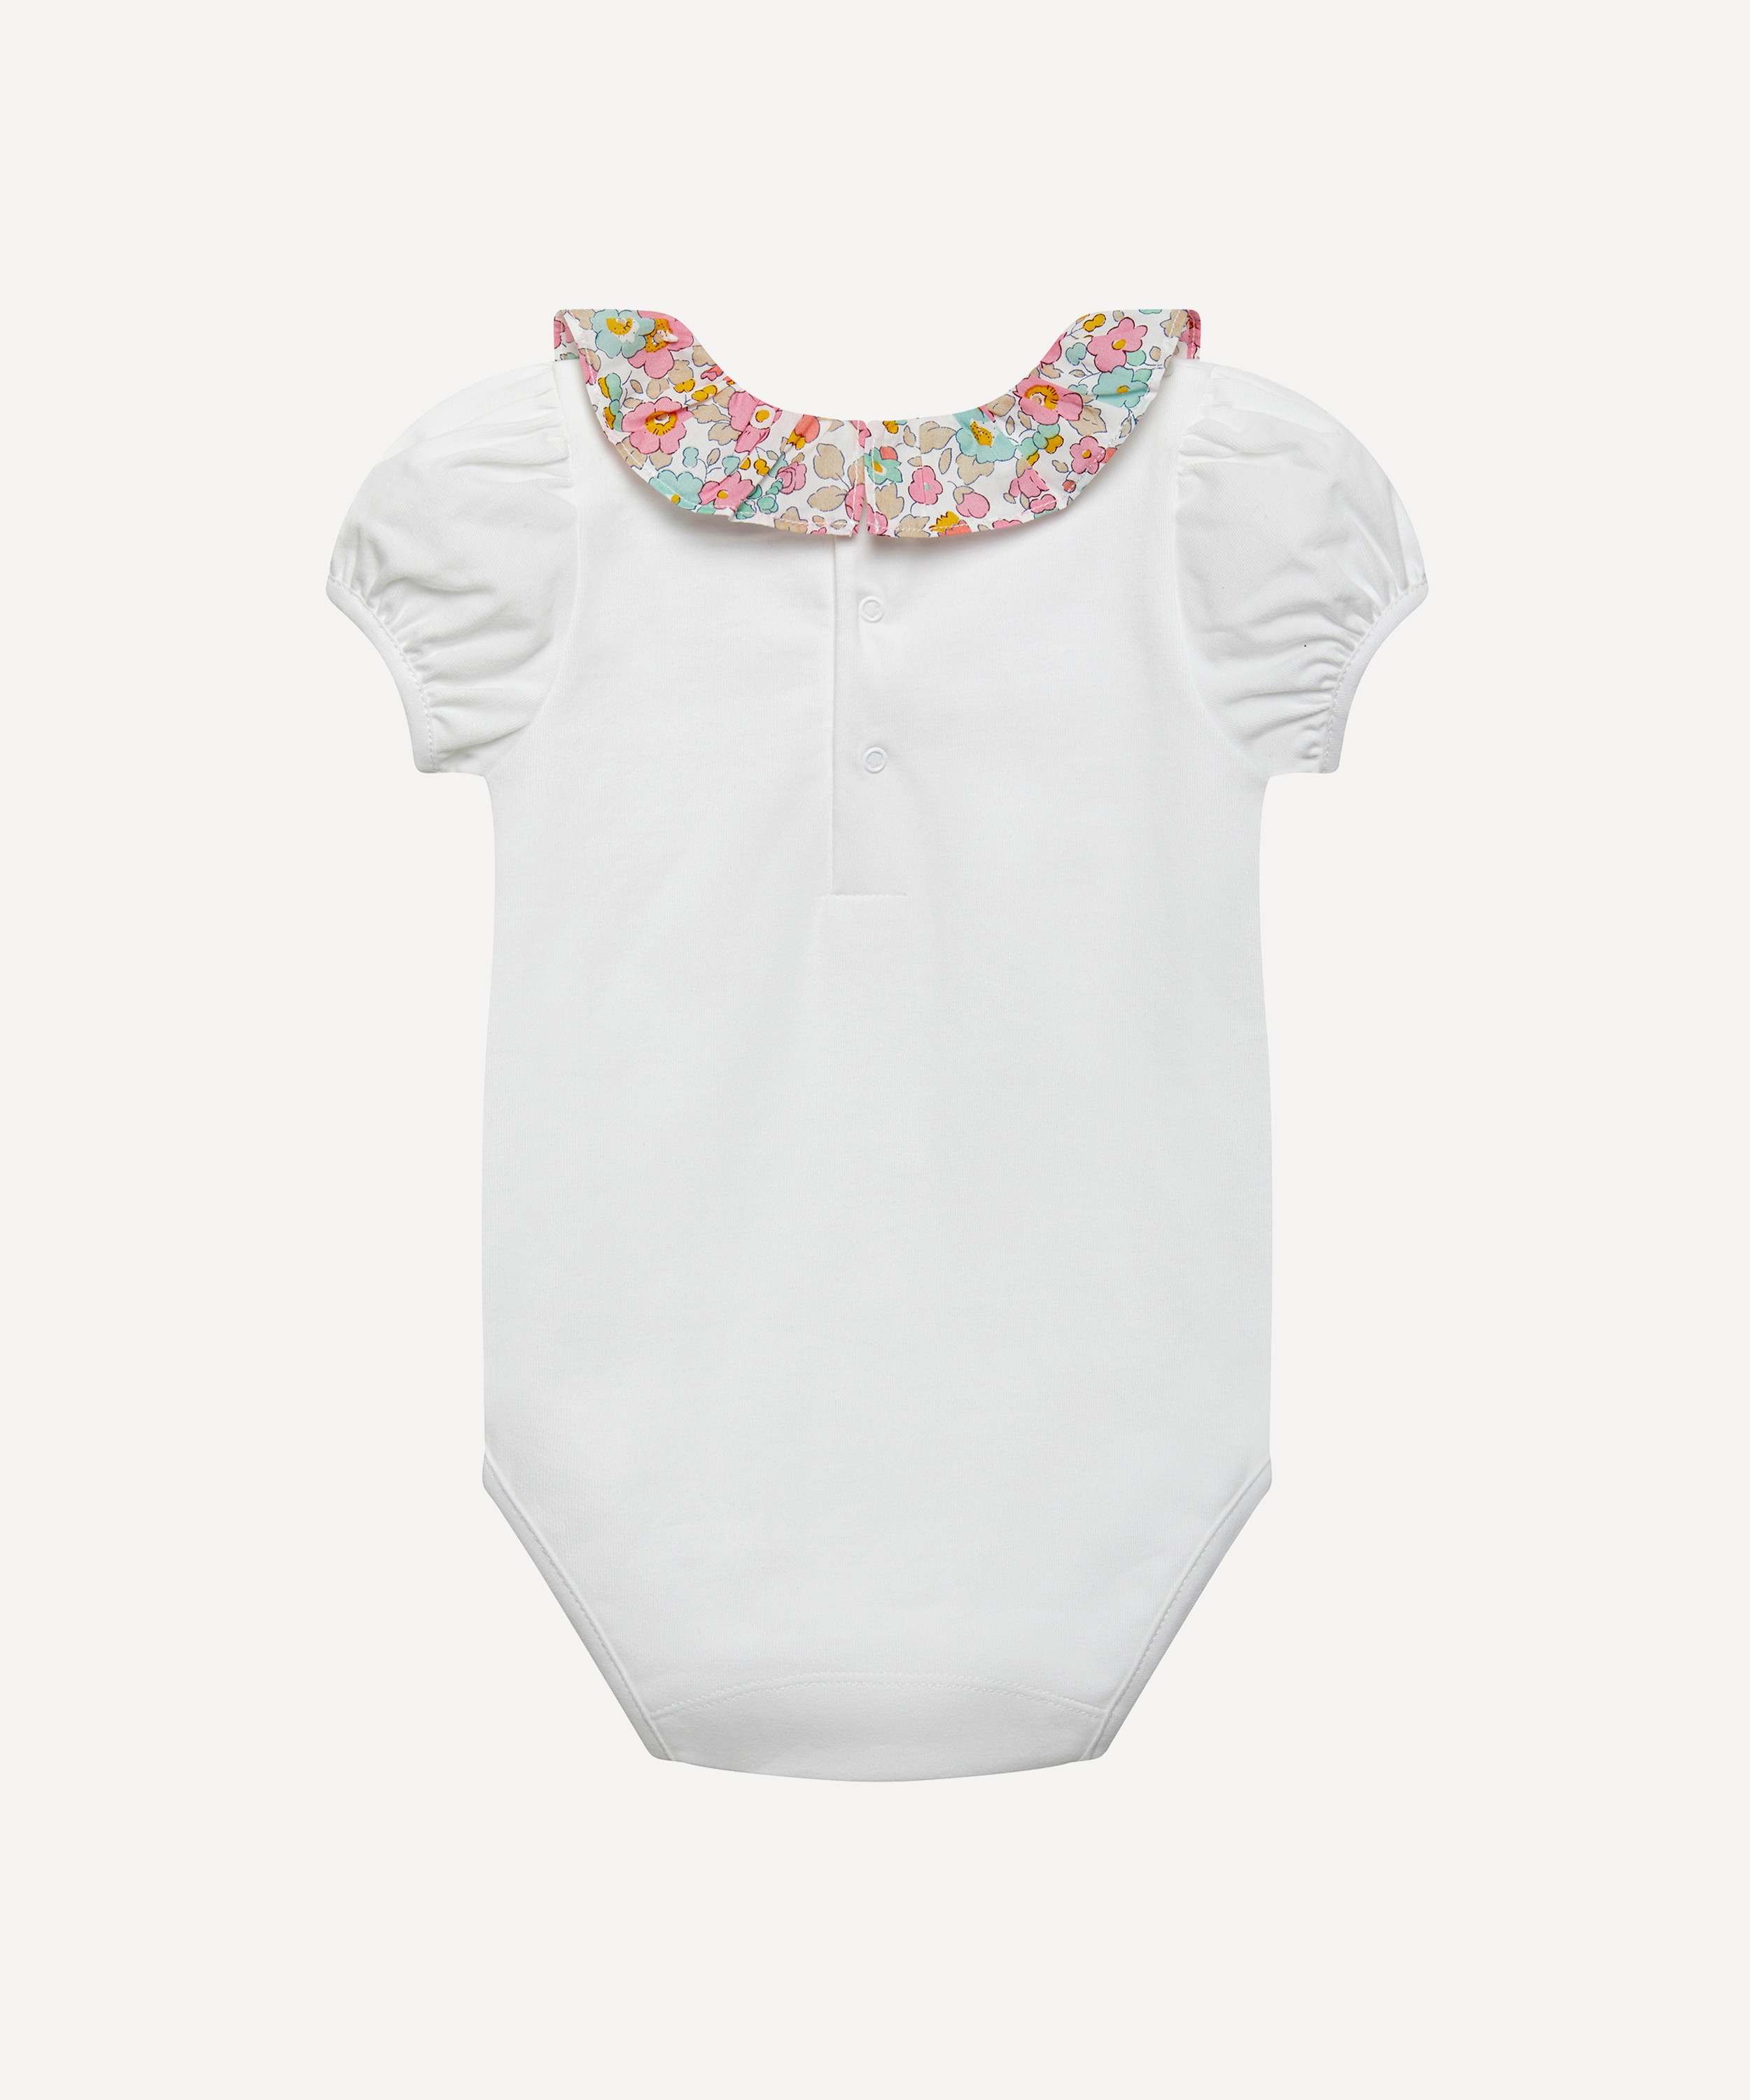 Trotters - Betsy Willow Bodysuit 3-24 Months image number 1